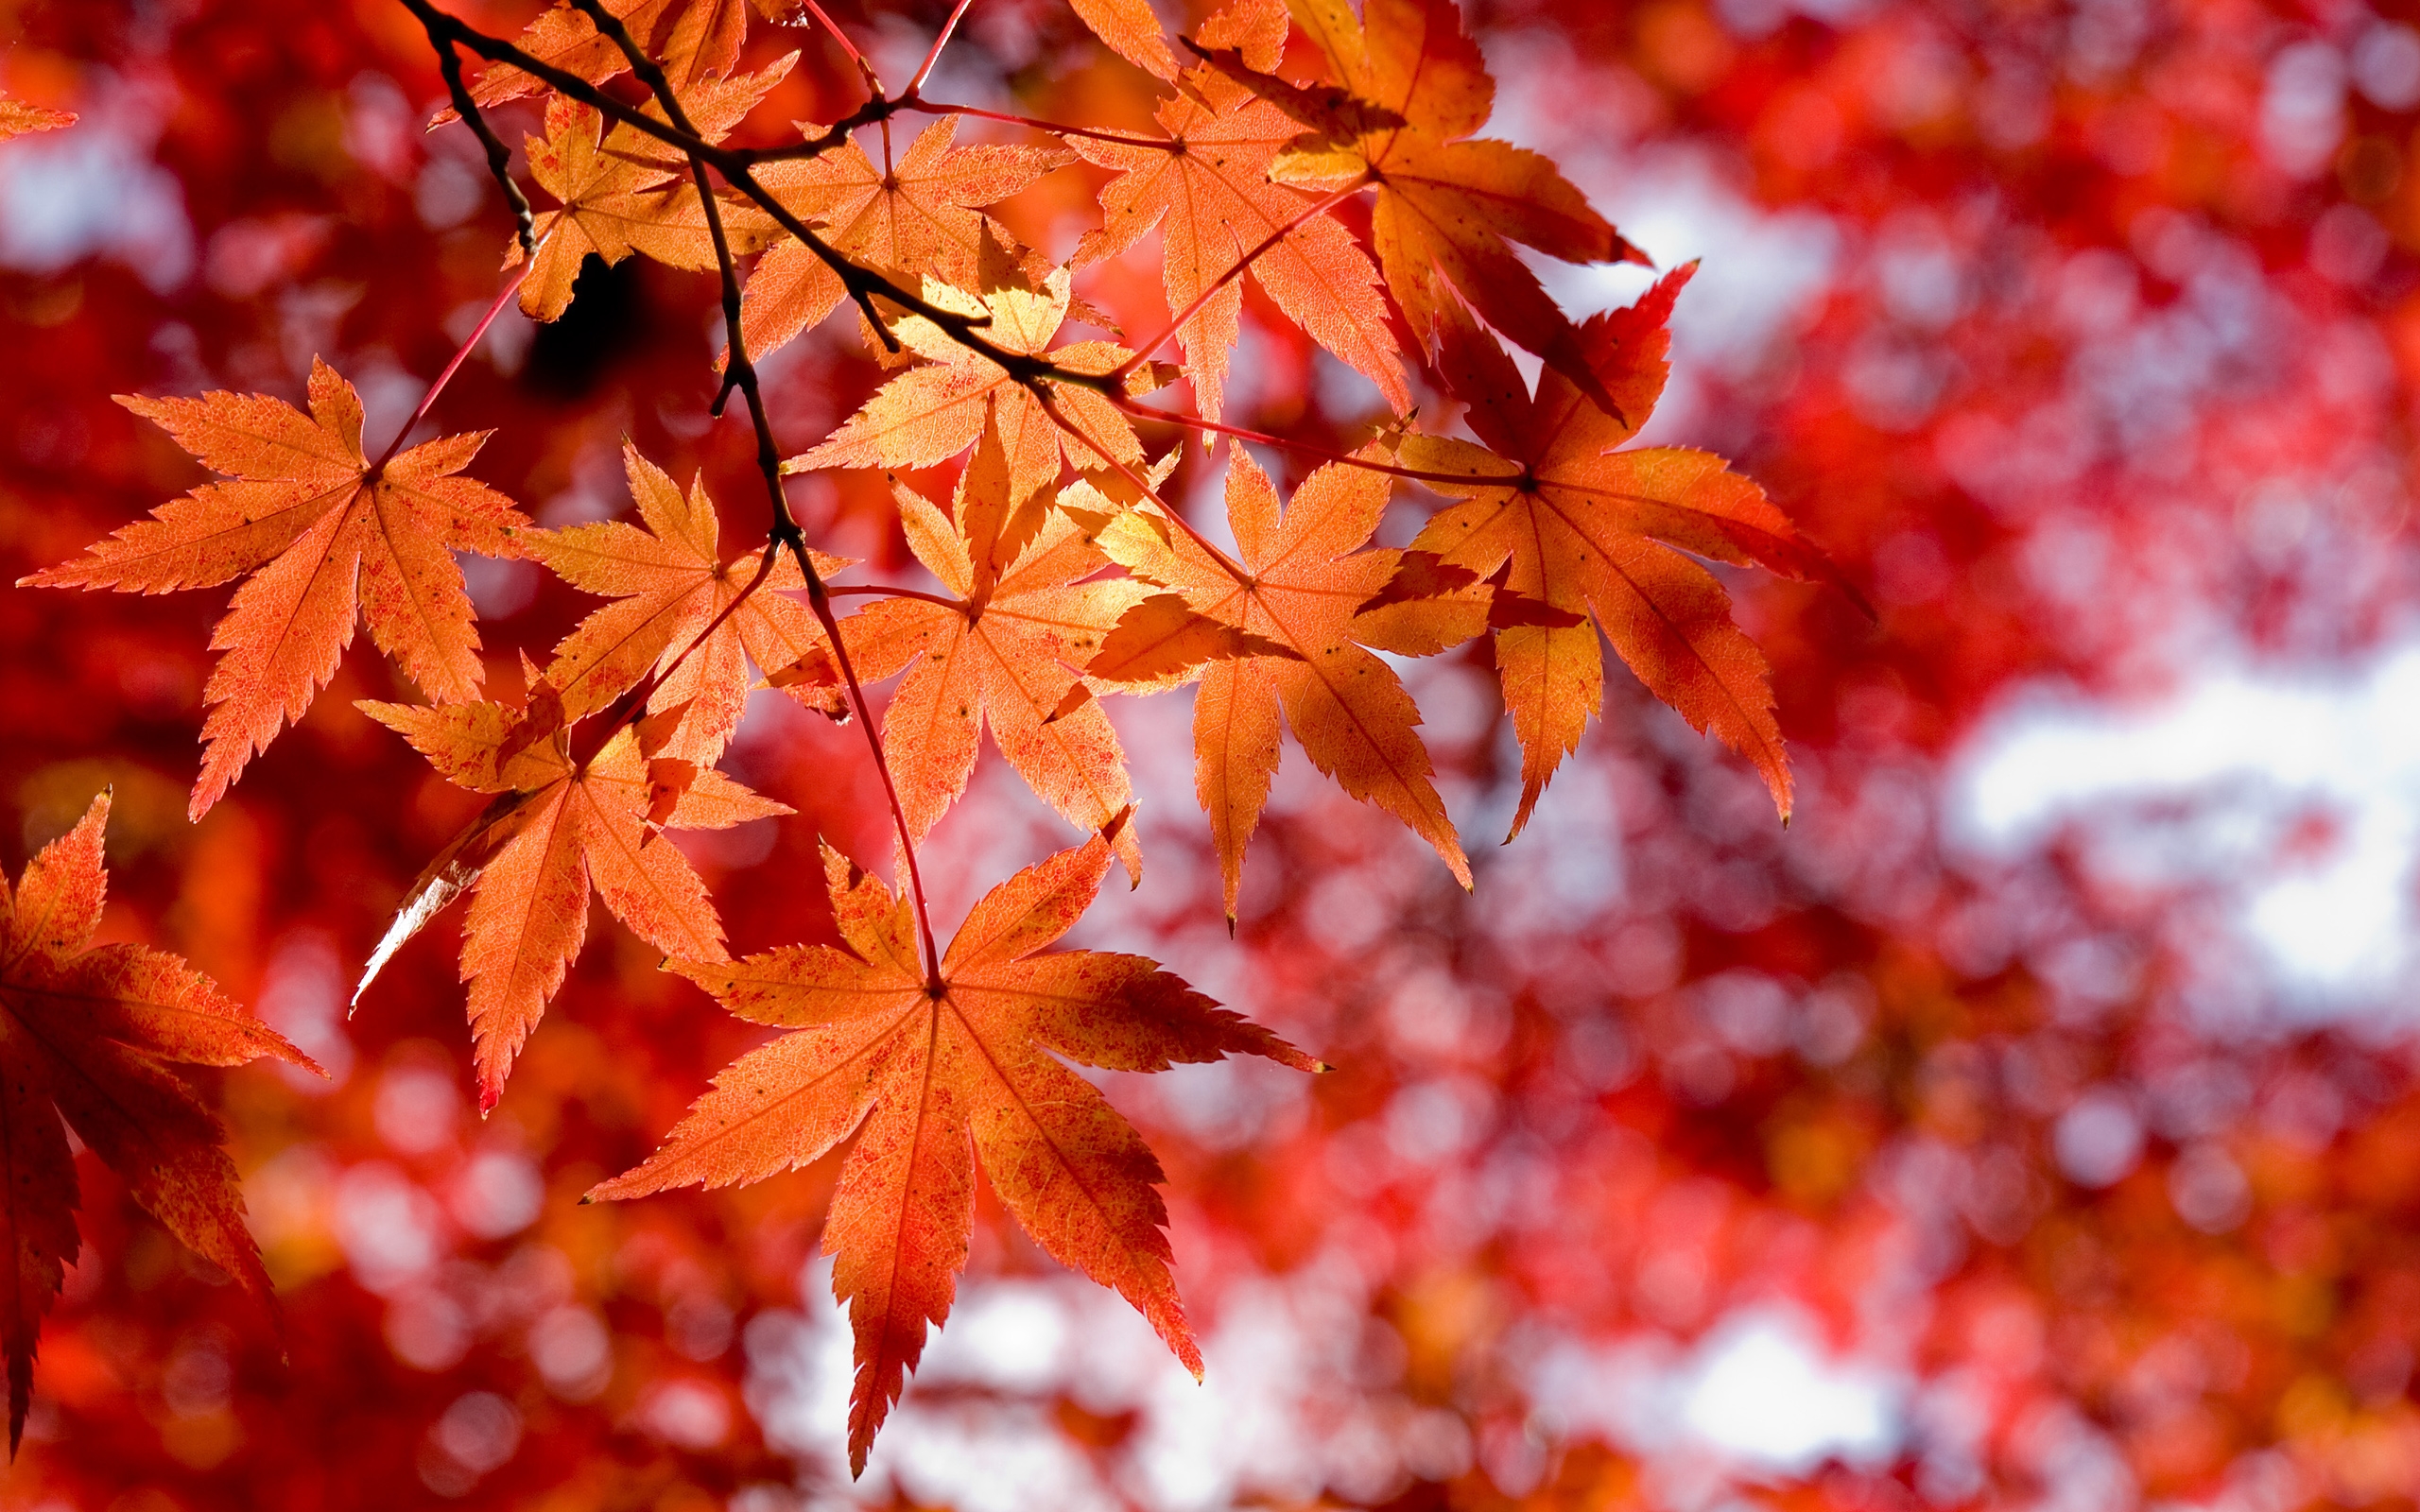 Red Maple Leaves wallpapers and images - wallpapers, pictures, photos